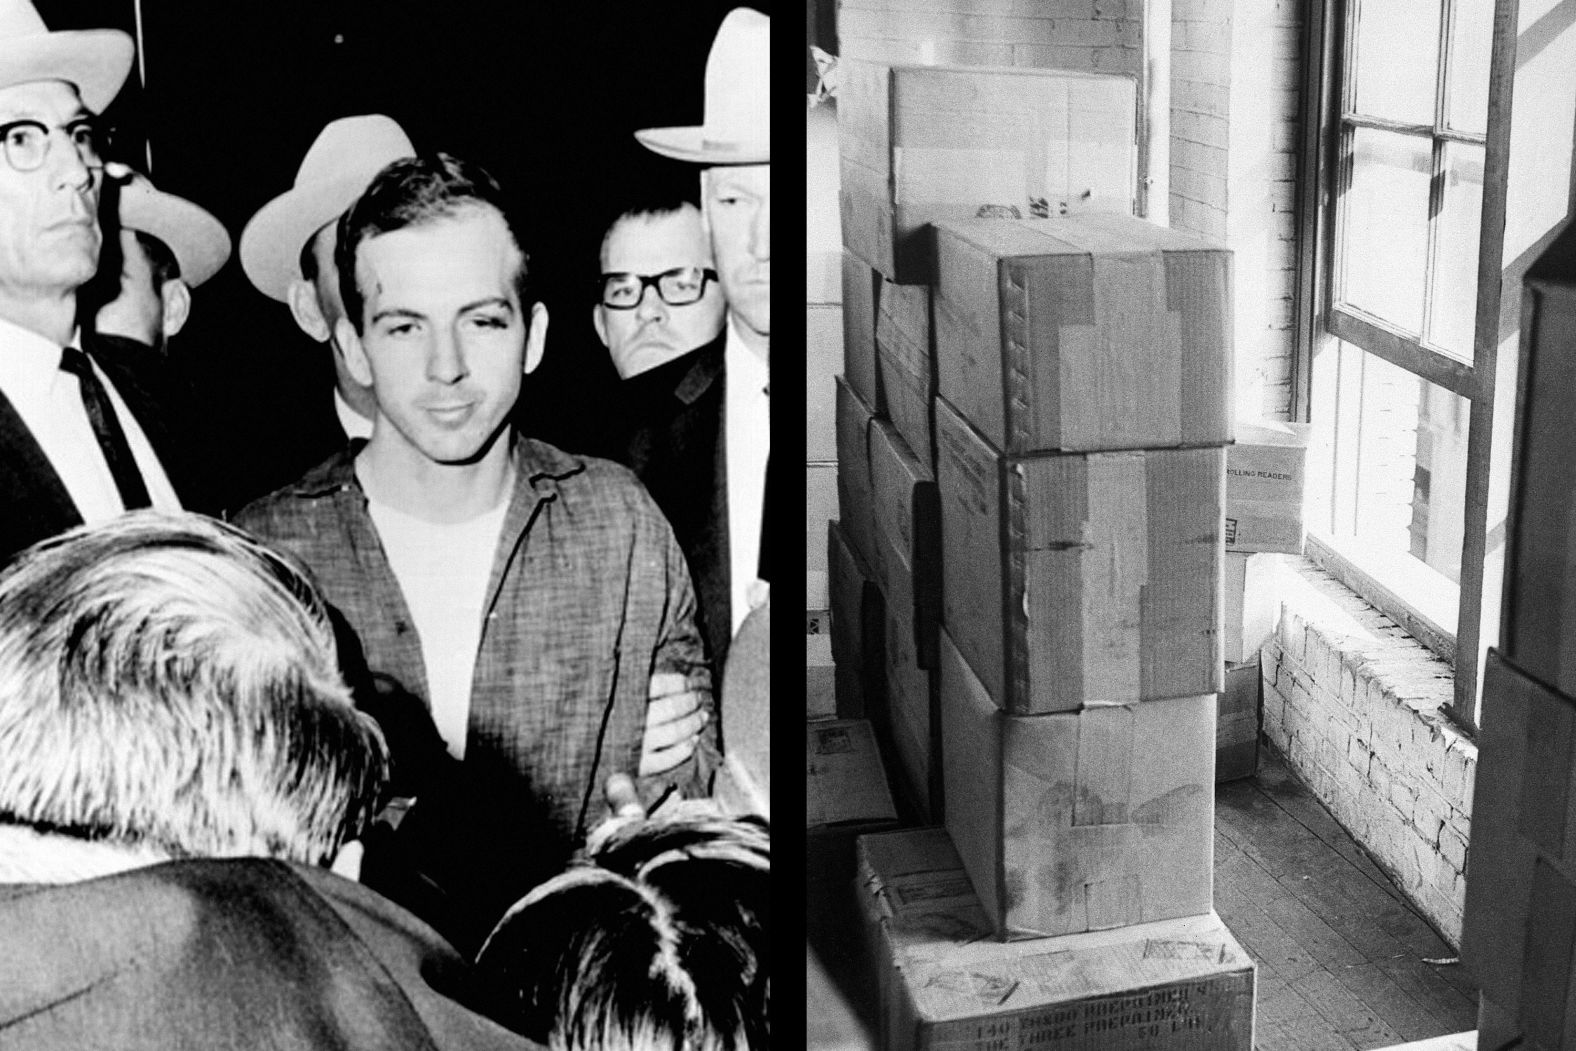 Lee Harvey Oswald is placed under arrest by Dallas police around 2 p.m. Oswald, a 24-year-old former Marine, was fatally gunned down two days later by Jack Ruby.